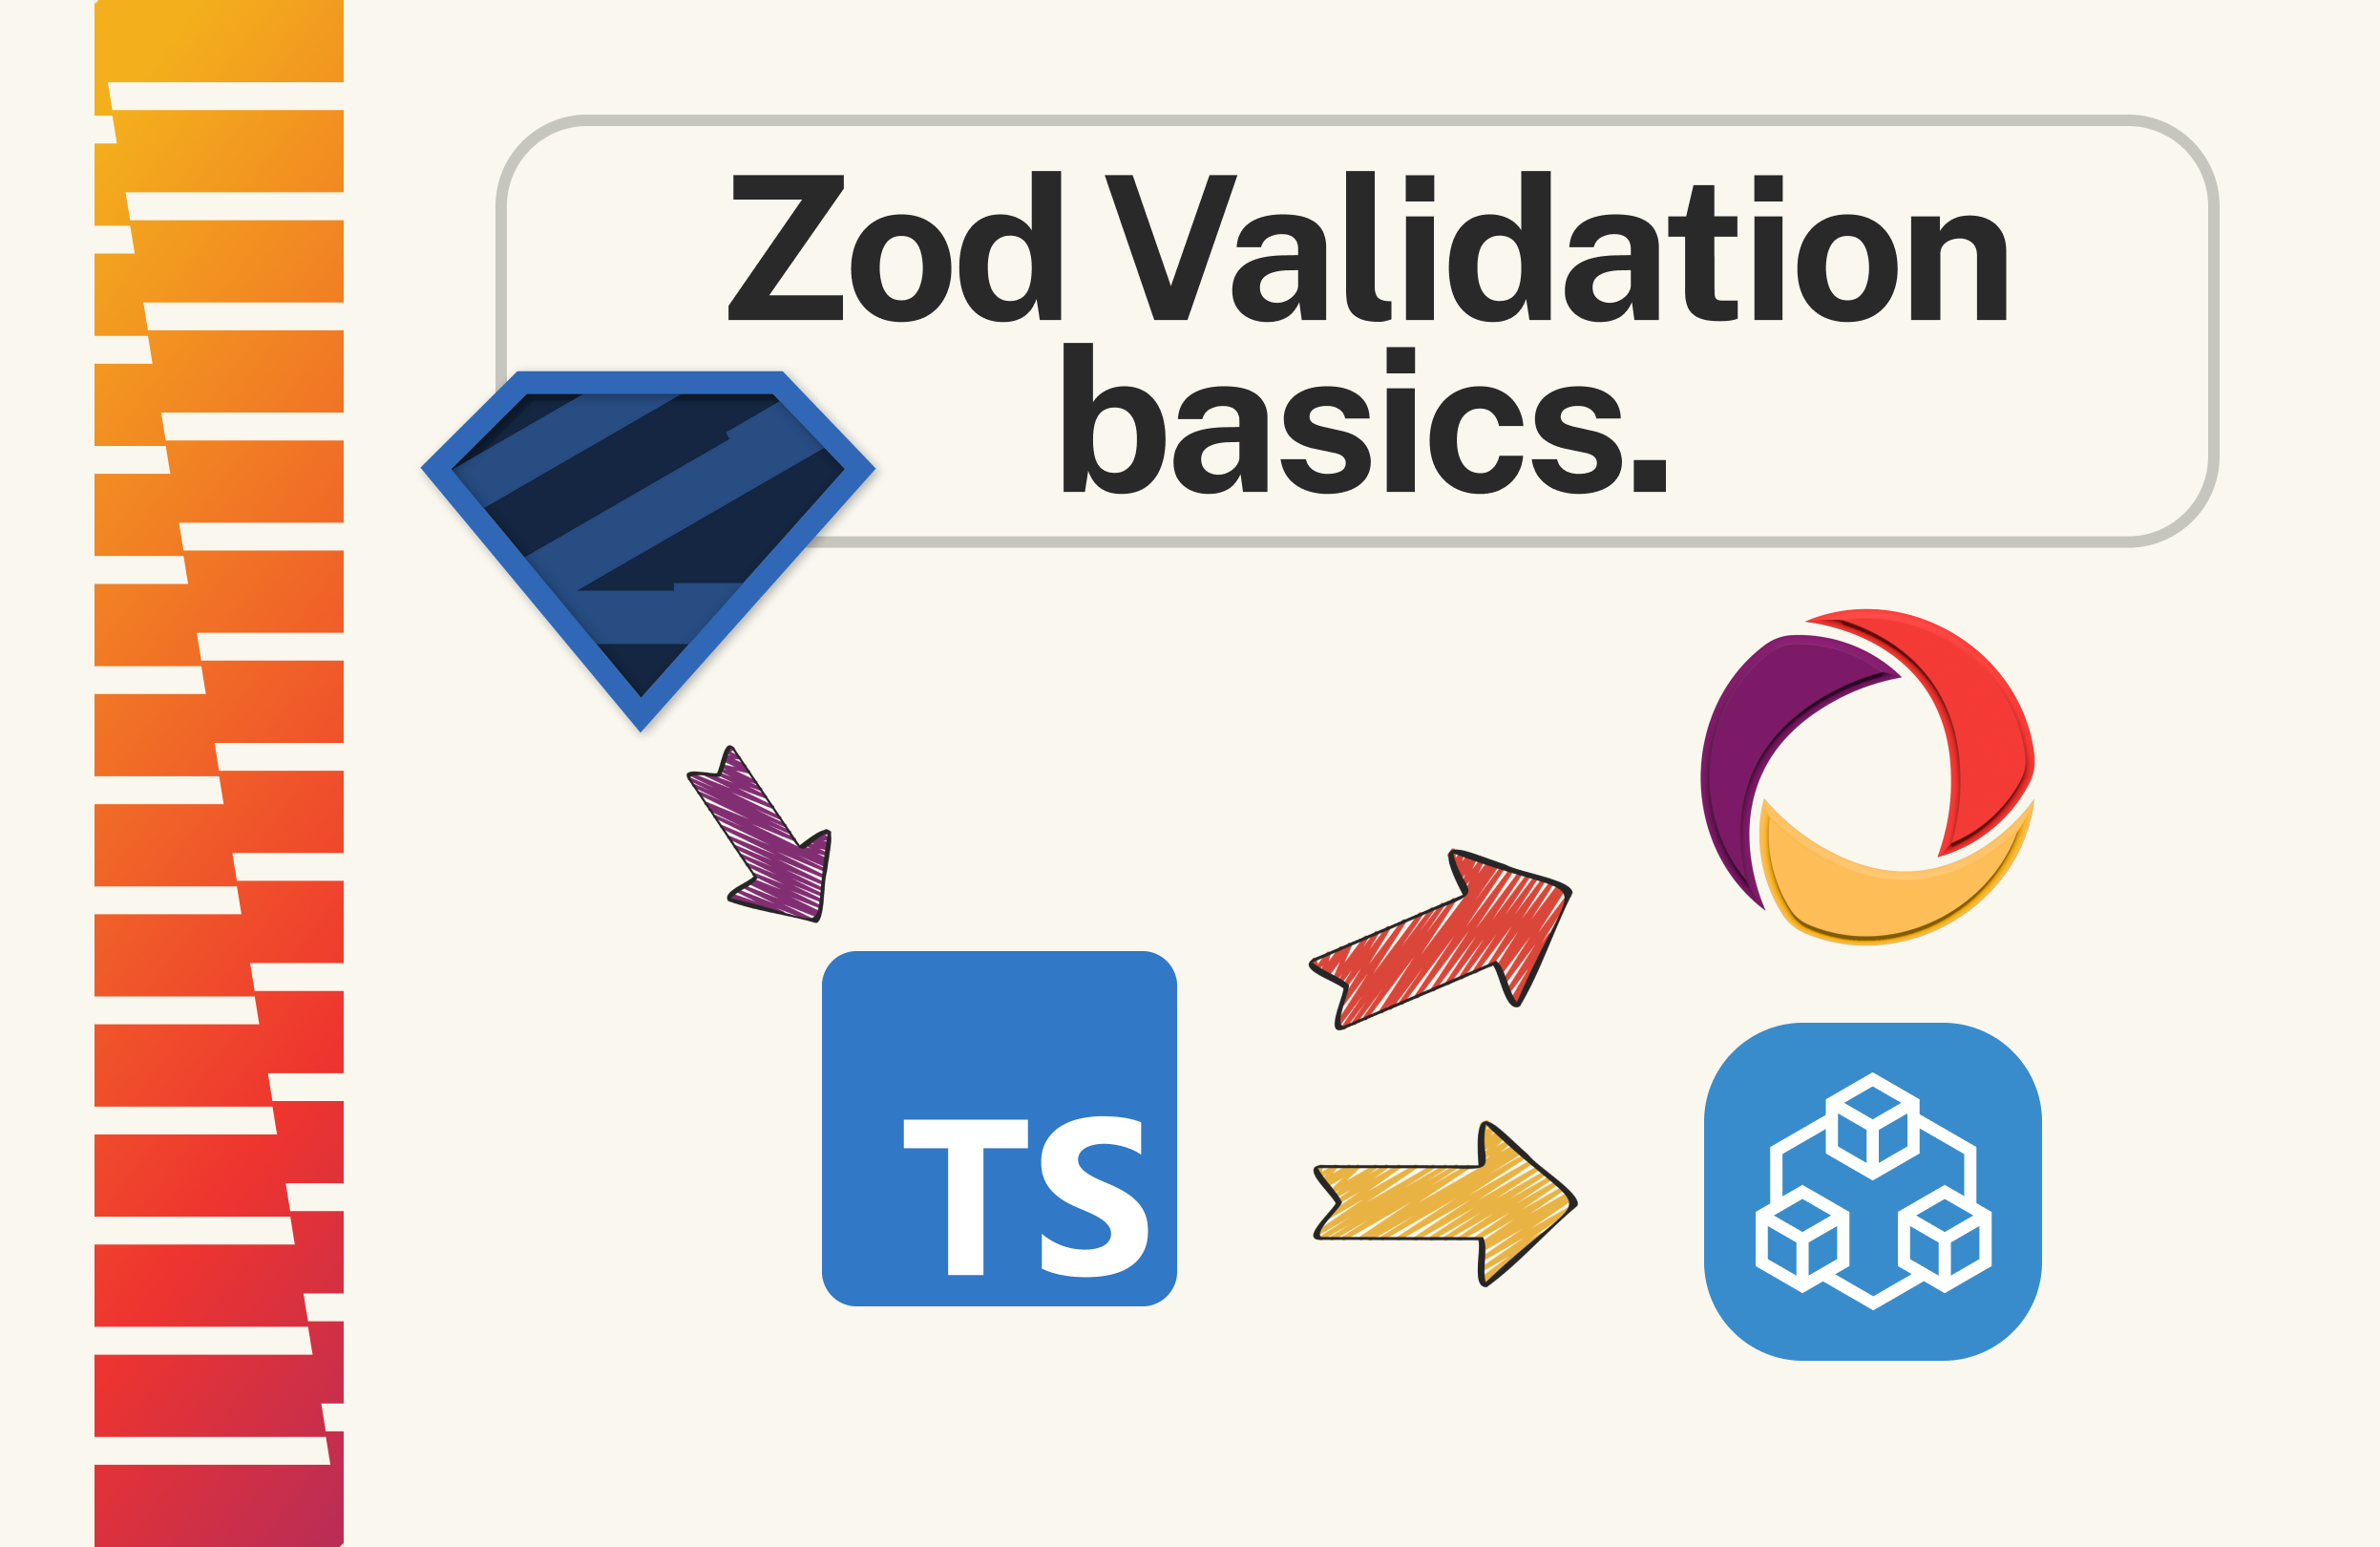 Use zCustomQuery to add zod argument validation